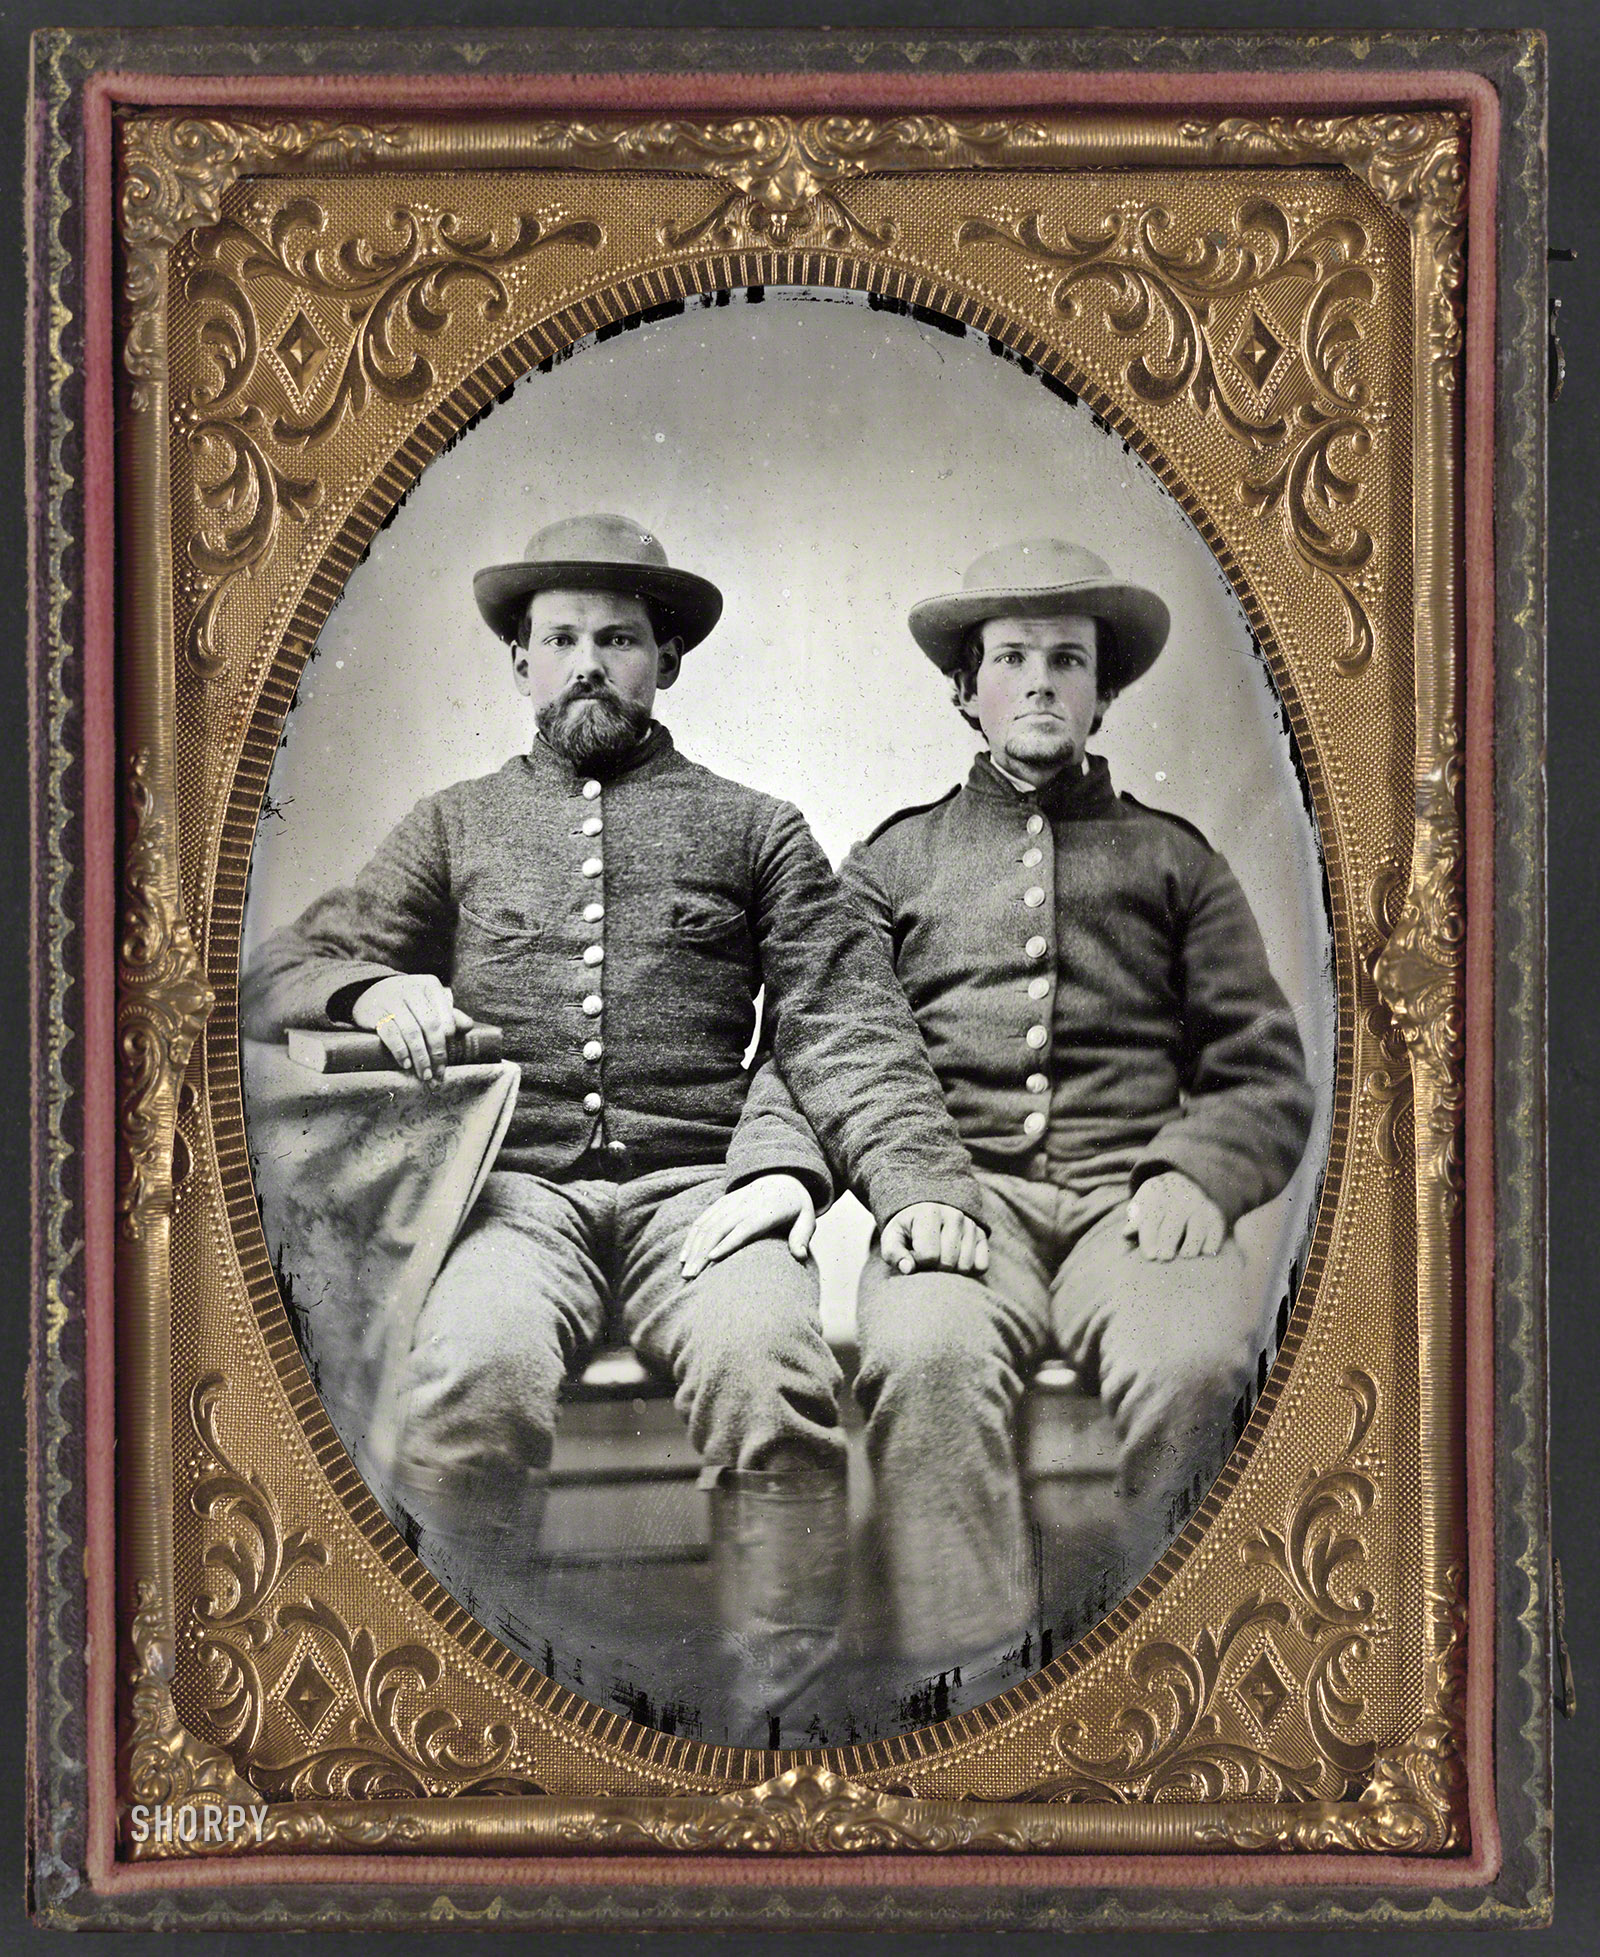 1861-65. "Pvt. Charles Chapman of Company A, 10th Virginia Cavalry Regiment (left), and unidentified soldier." Half-plate ambrotype, hand-colored. Liljenquist Family Collection of Civil War Photographs, Library of Congress. View full size.